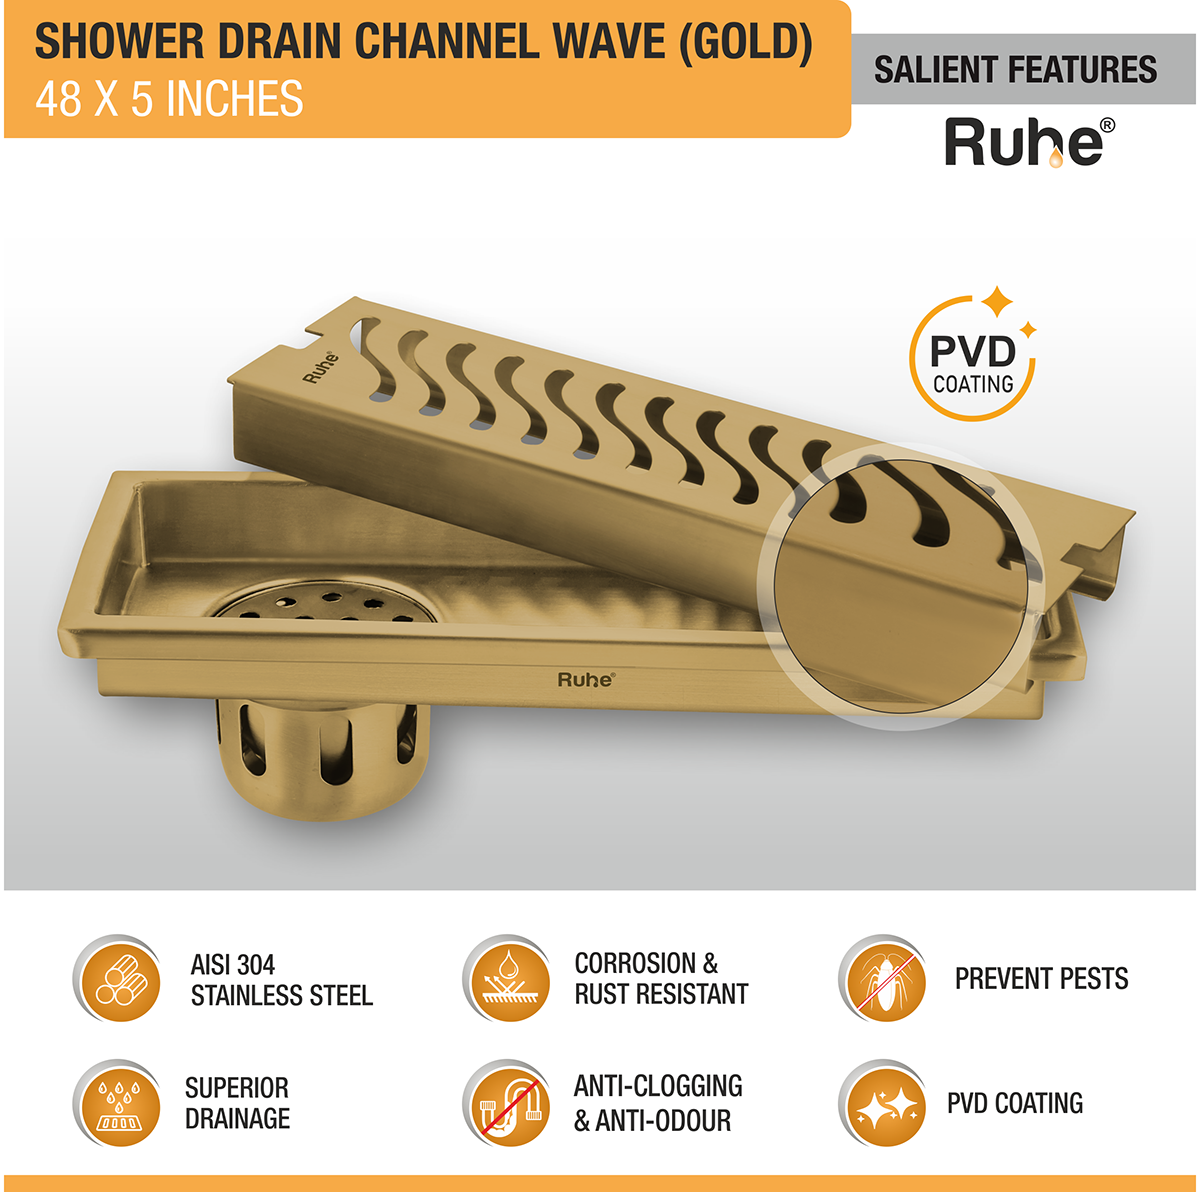 Wave Shower Drain Channel (48 x 5 Inches) YELLOW GOLD features